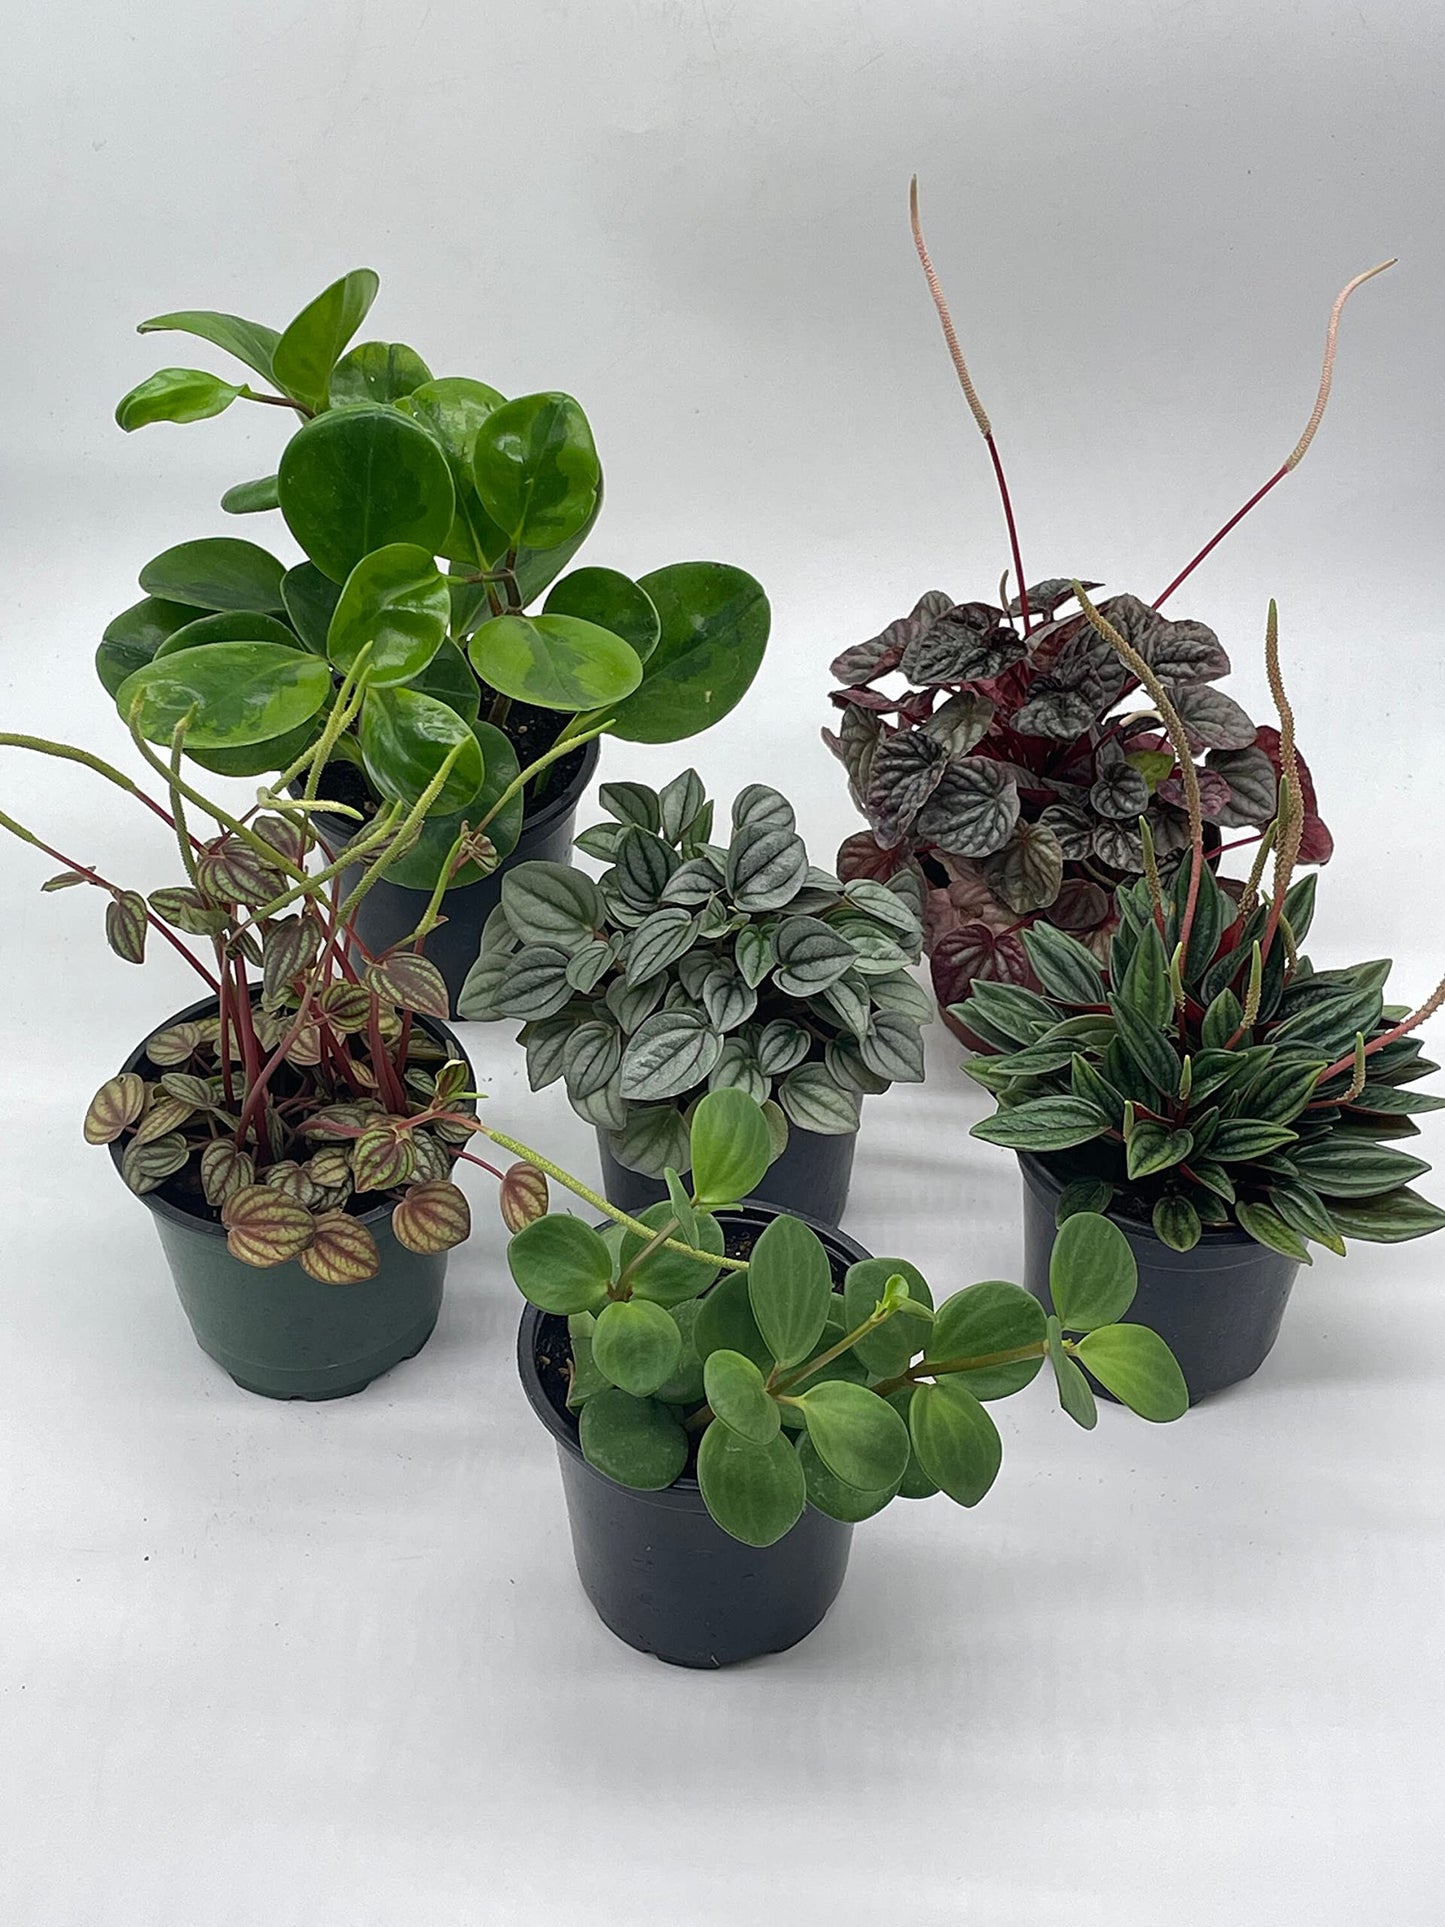 Peperomia Assortment Set, 4 inch pots, Watermelon, Marble, Ripple, Rosso, albviotta, carperata, Variety Assorted Collection